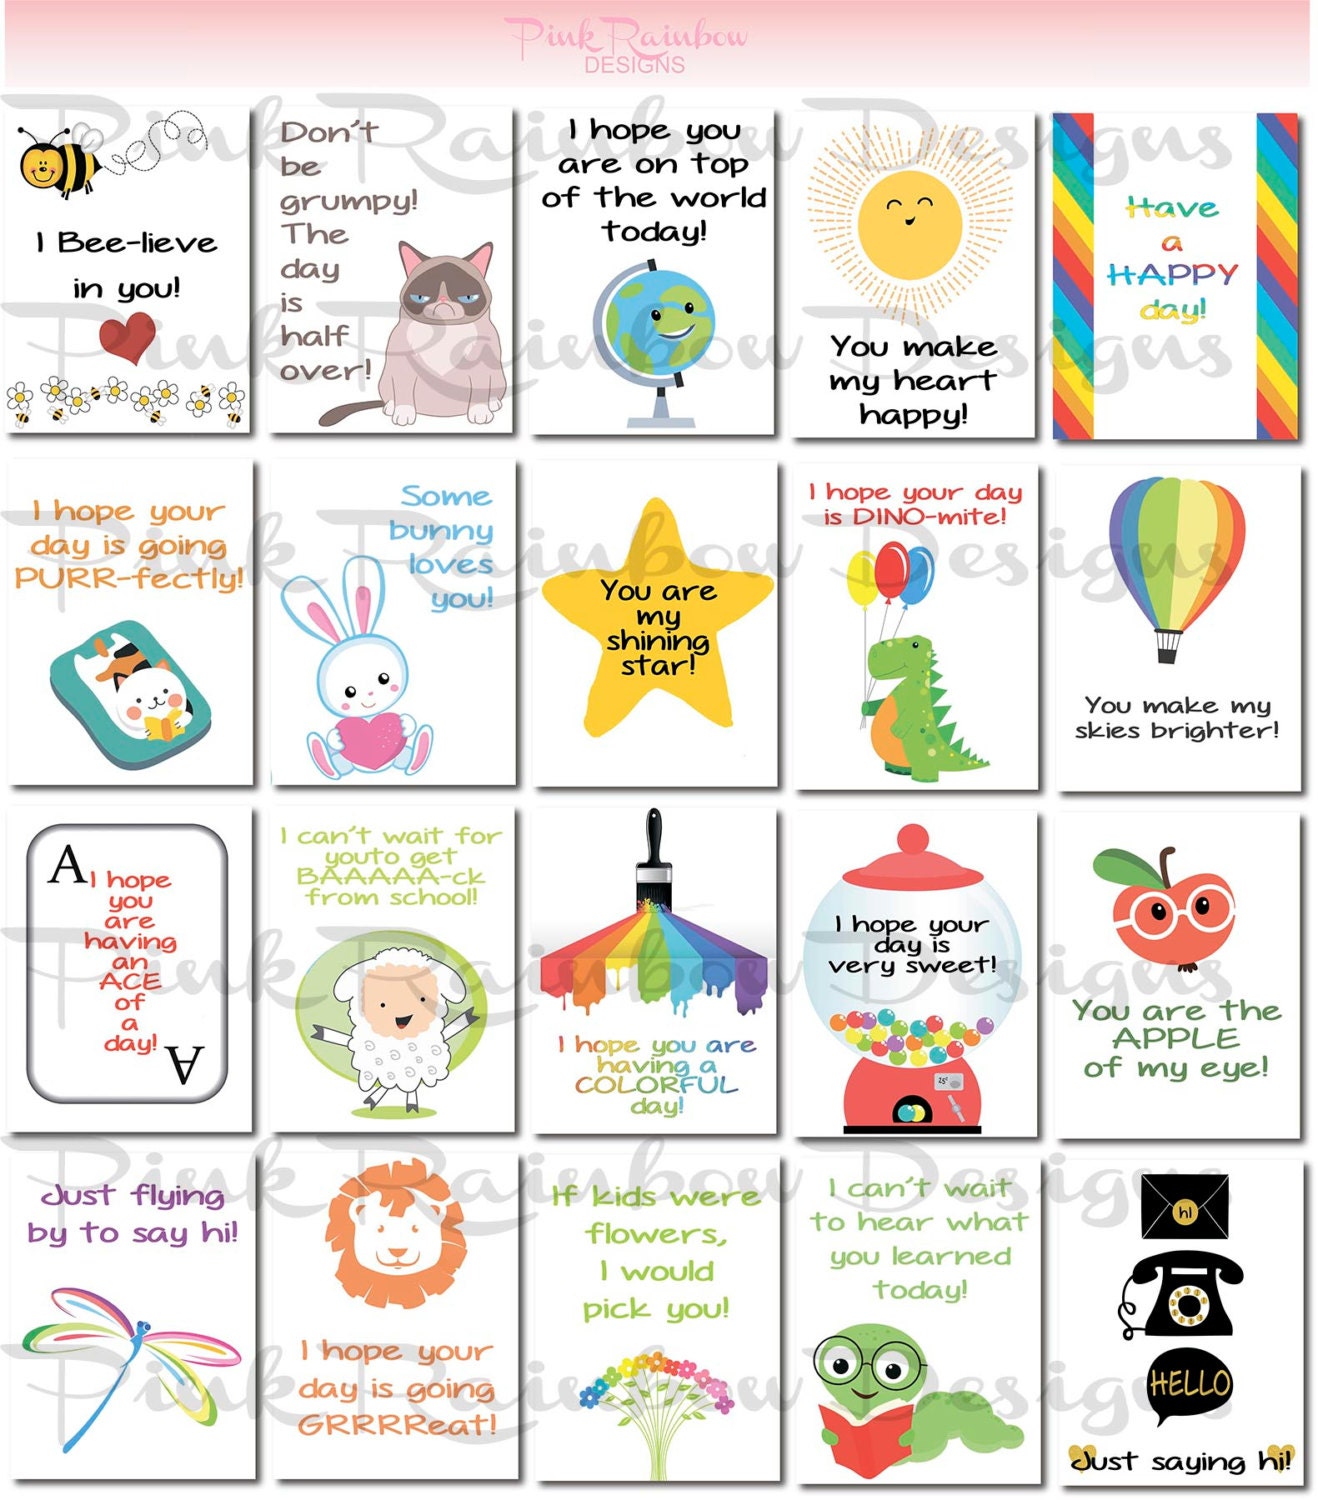 20-lunch-box-notes-cards-with-motivational-messages-for-kids